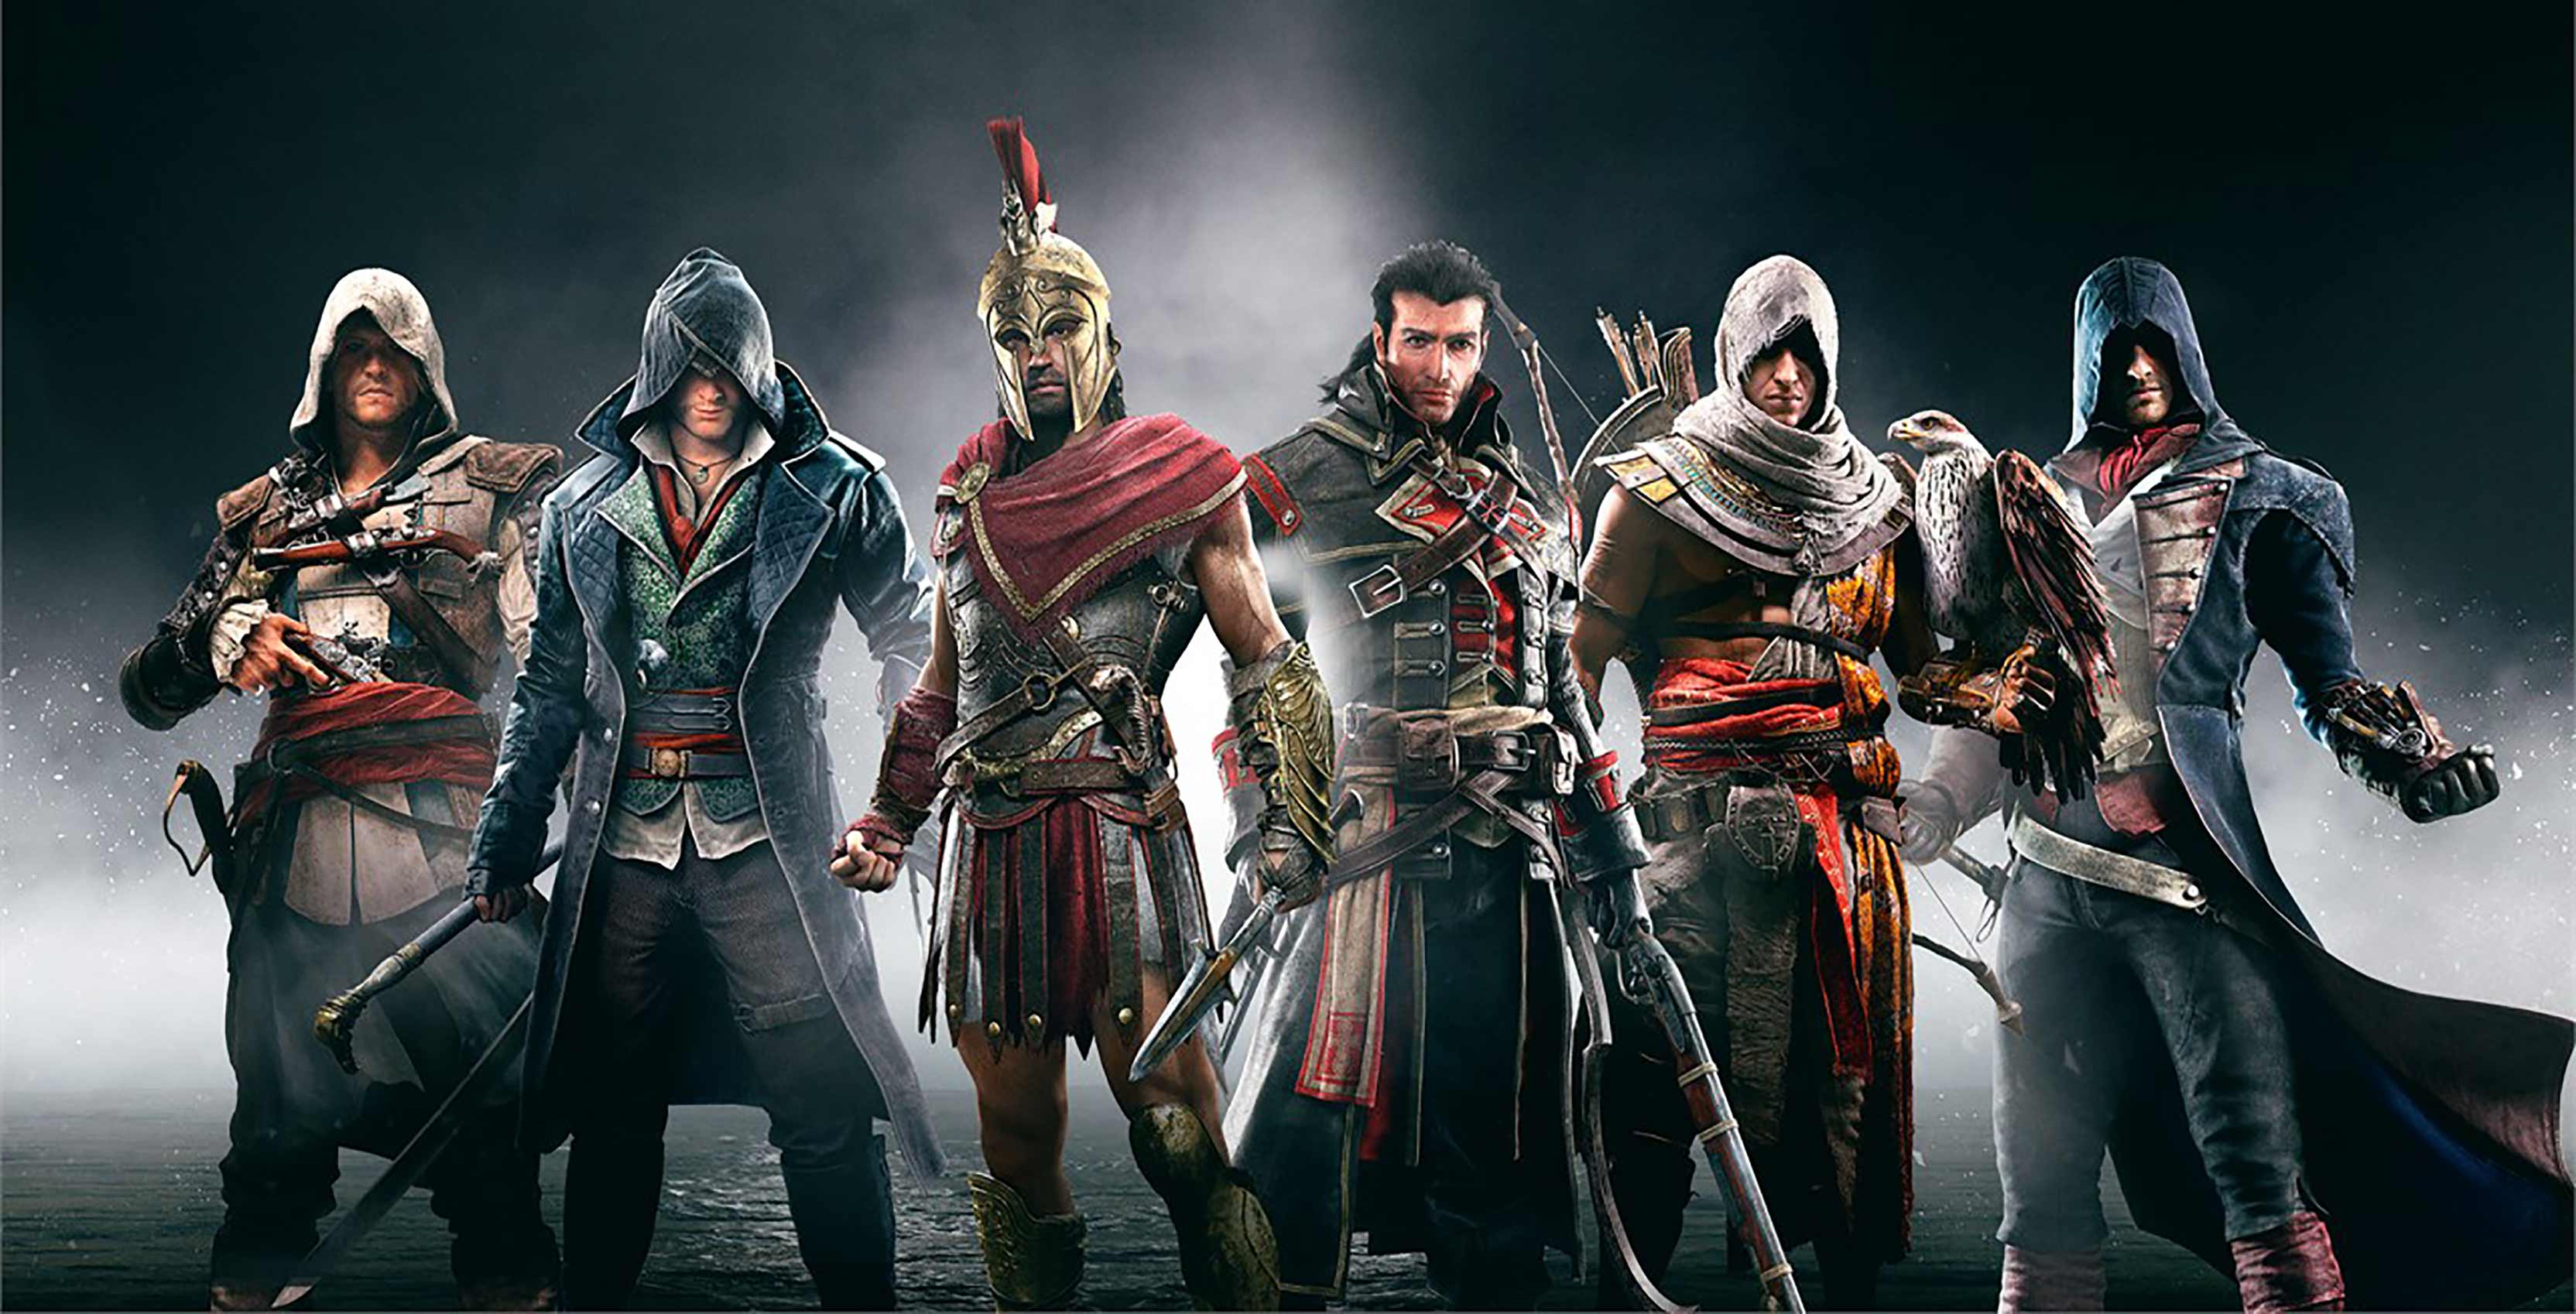 Assassin's Creed Legendary Collection